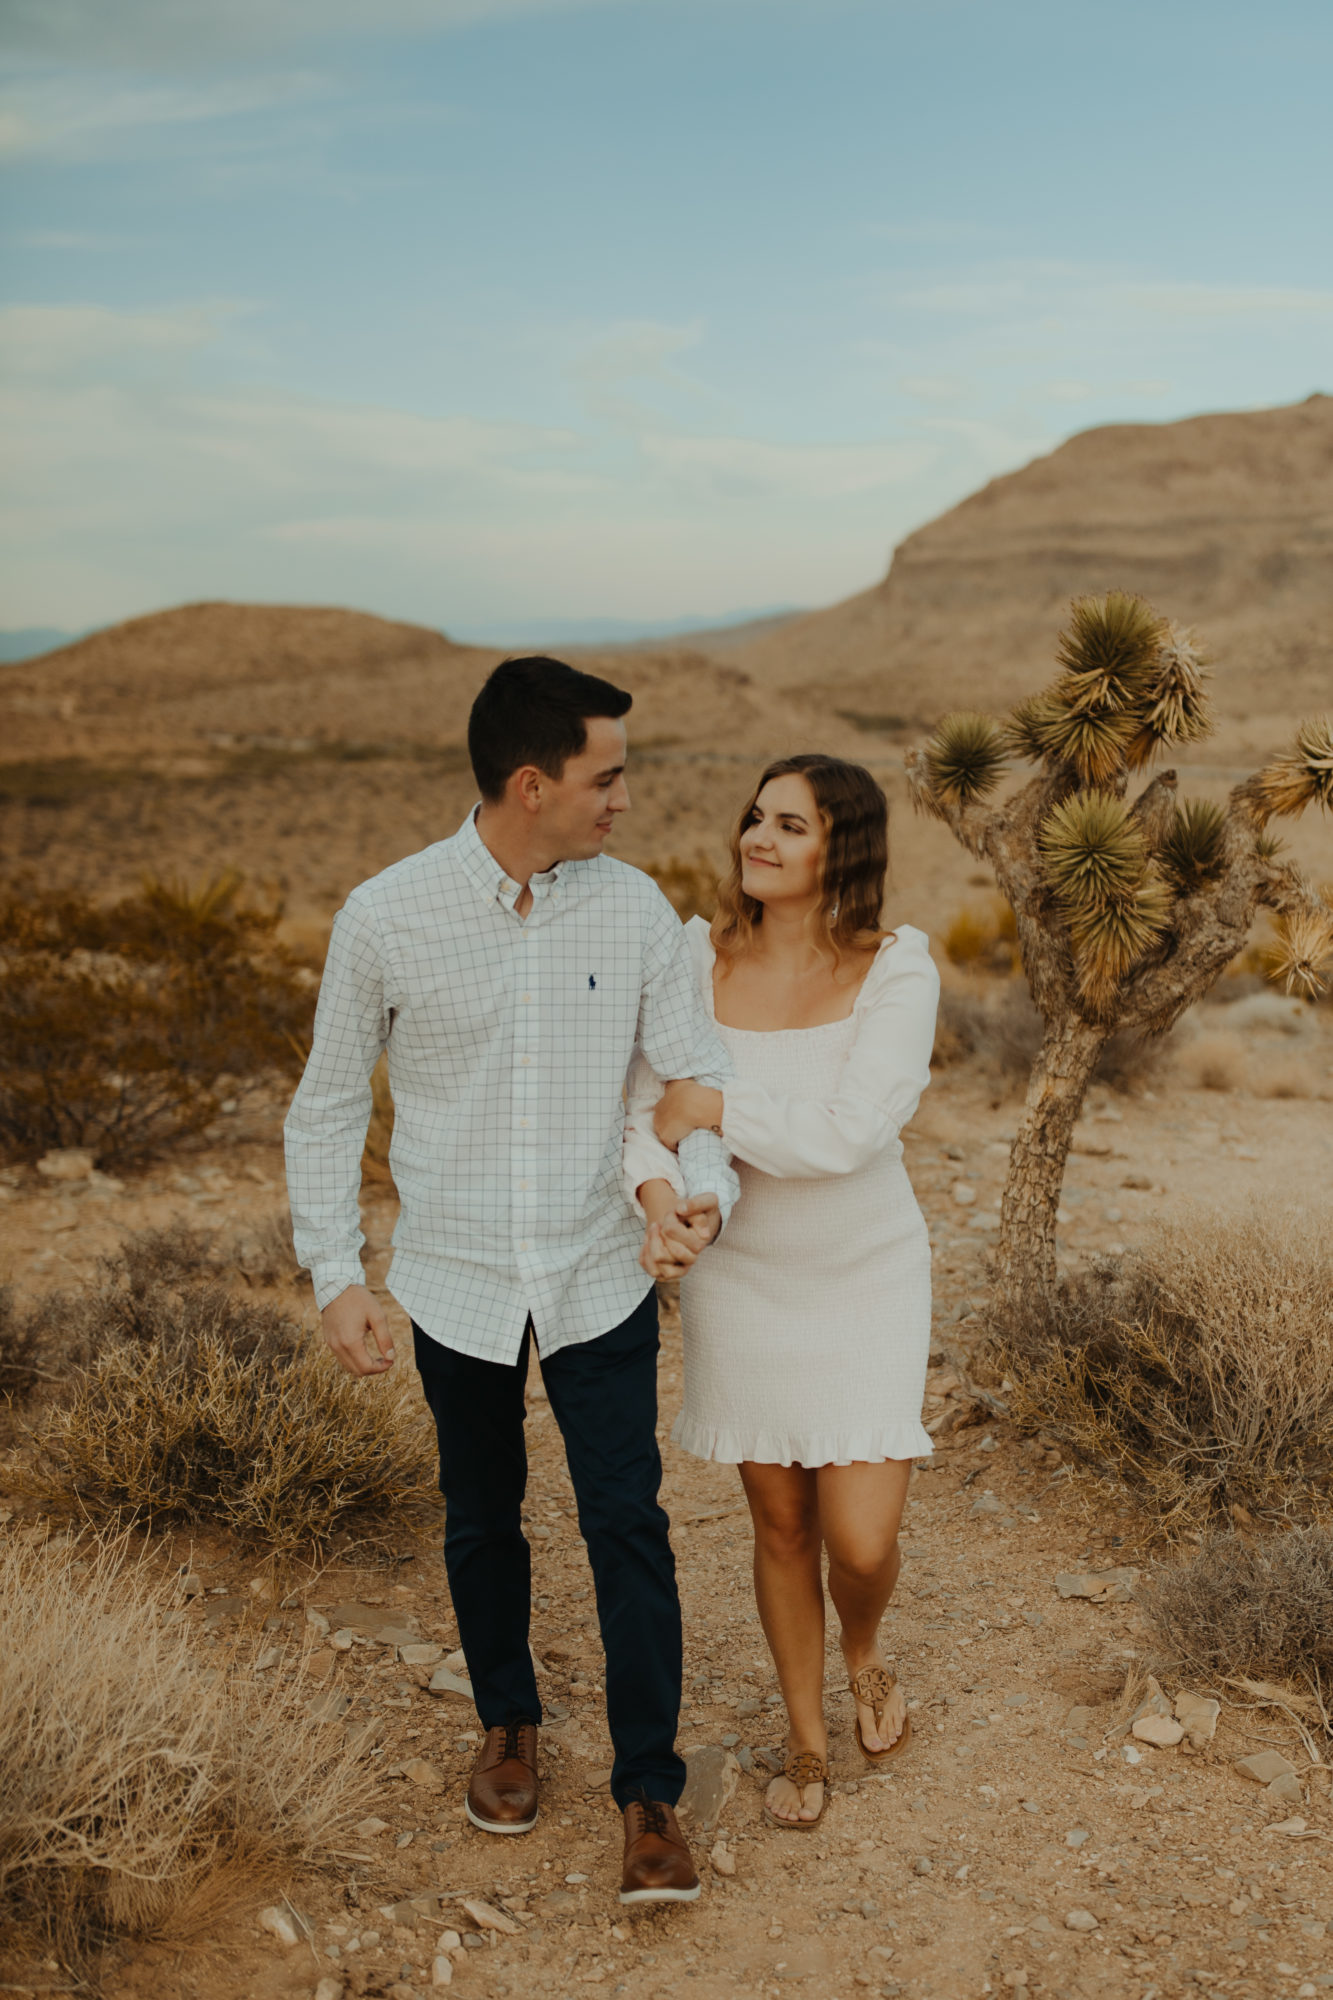 newly engaged couple walking through the desert together after he proposed